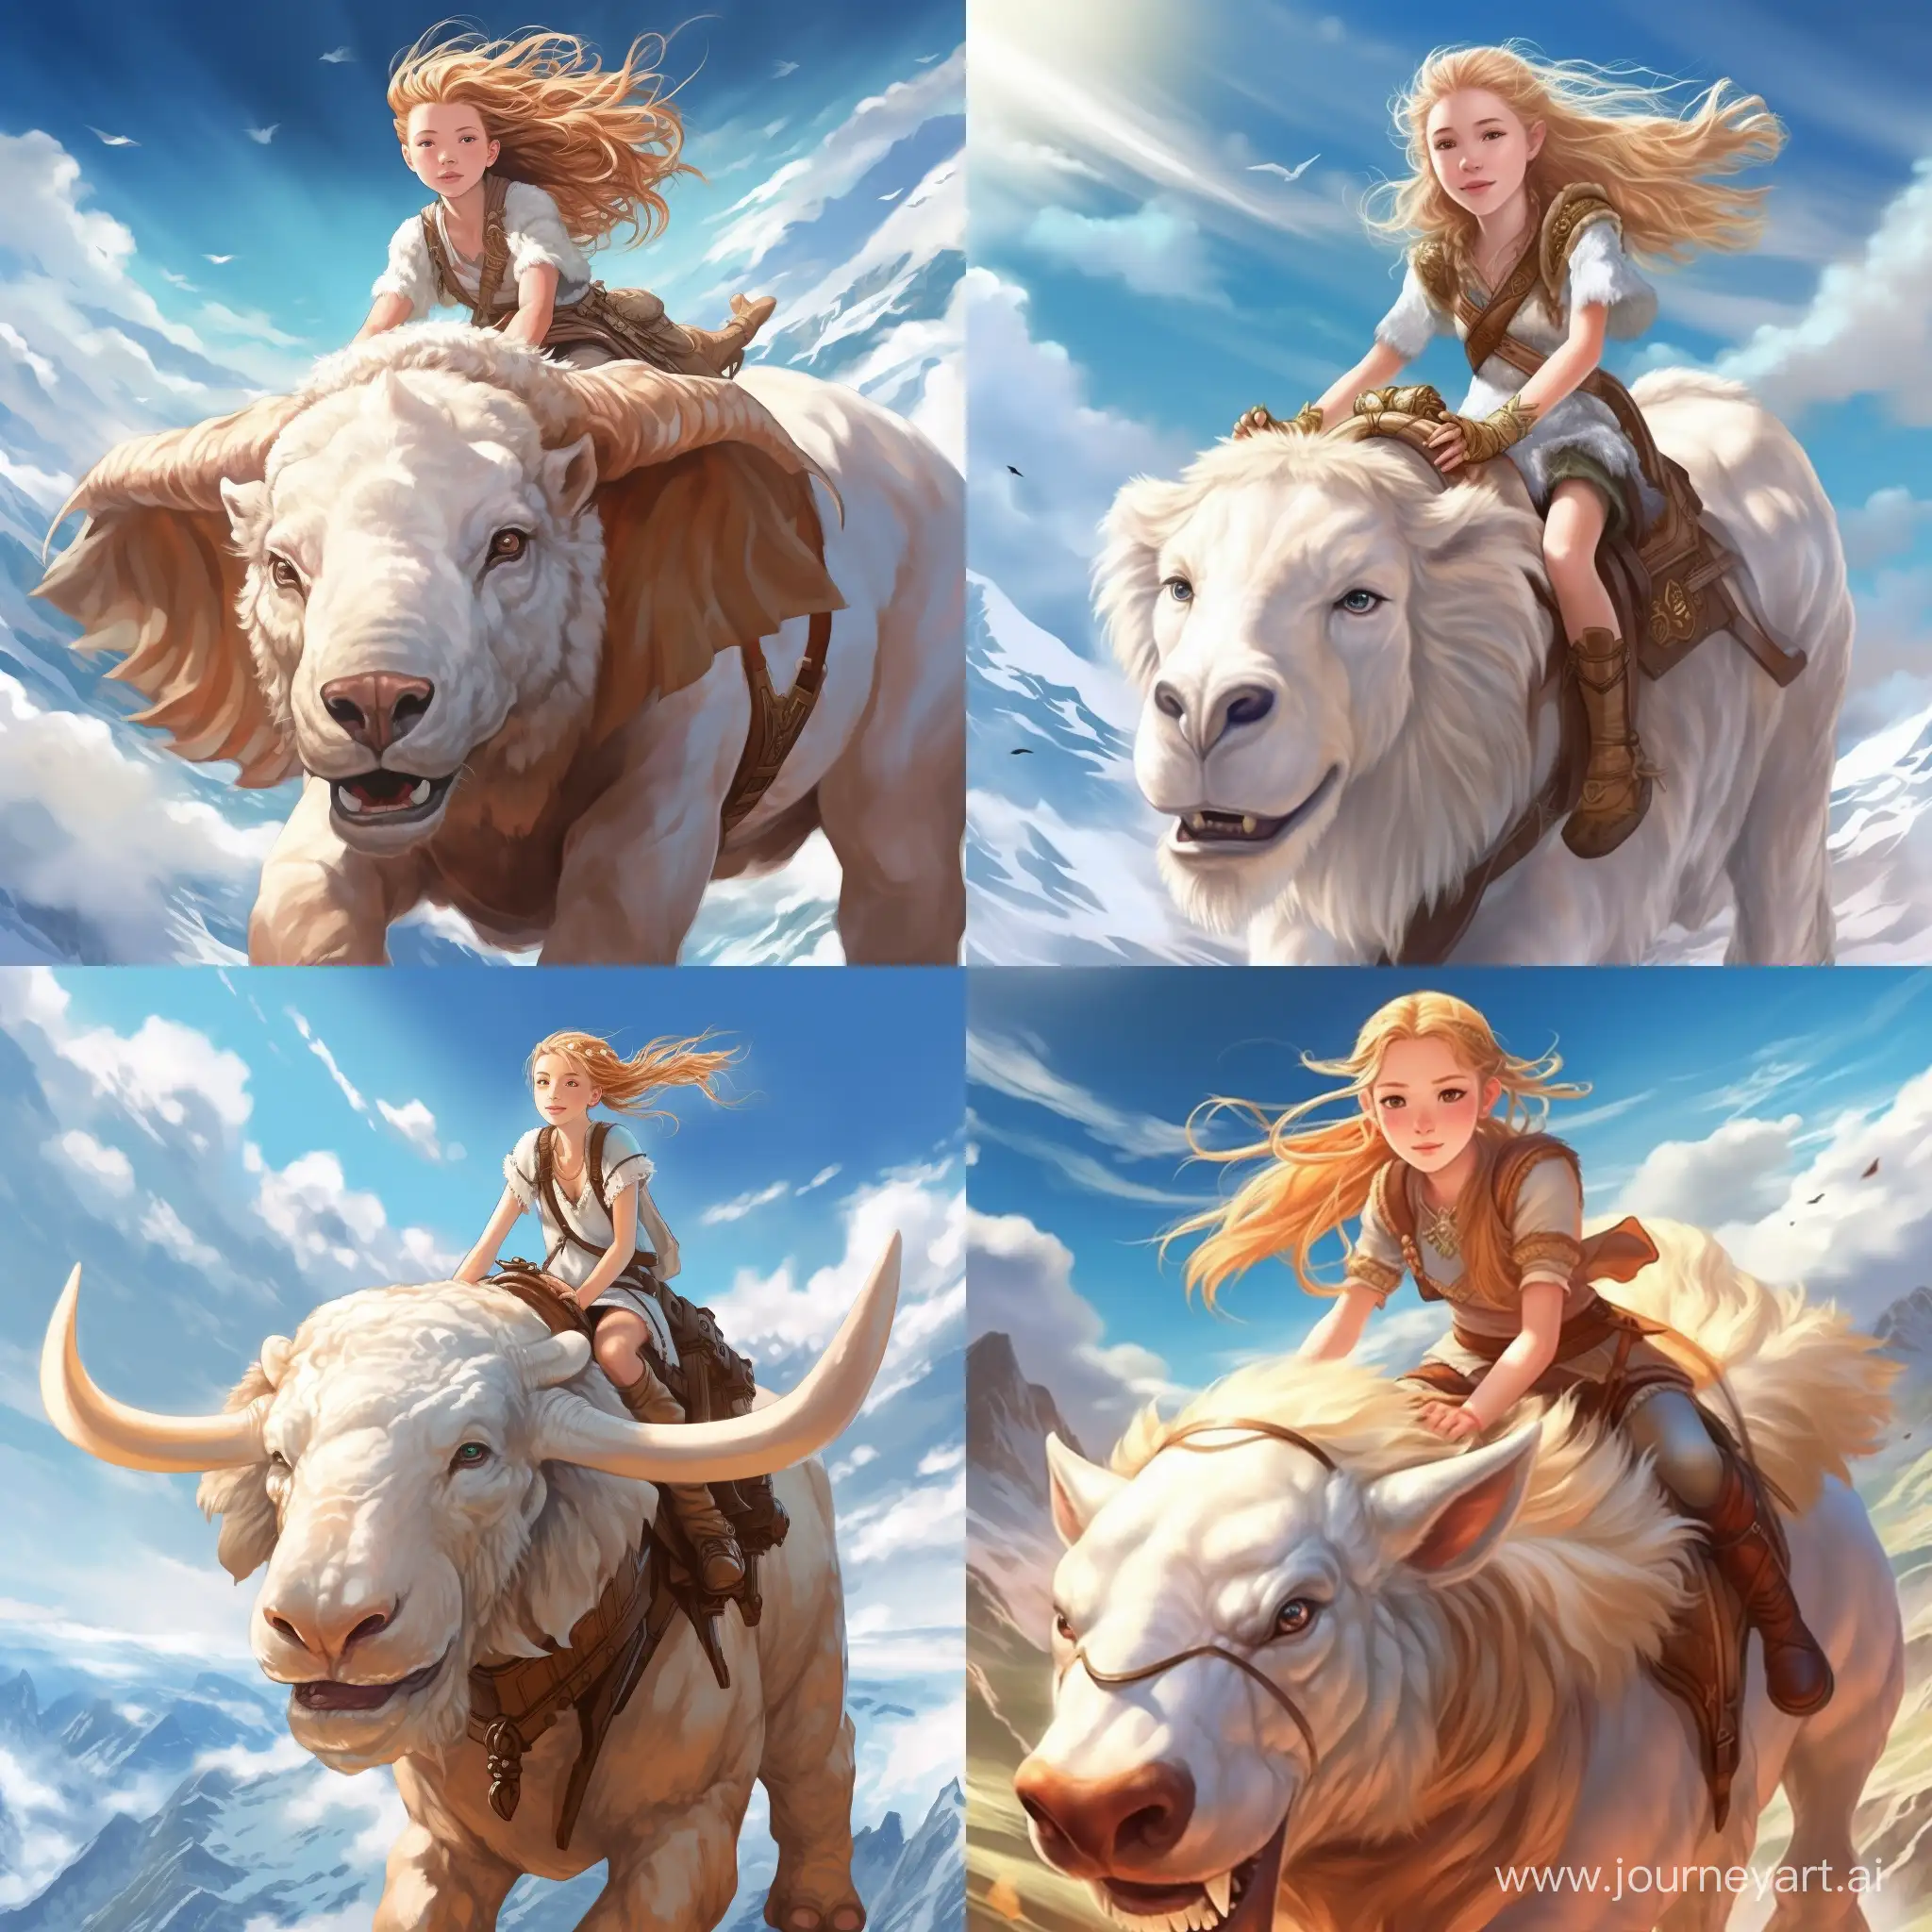 Beautiful girl, golden hair, gray-blue eyes, snow-white skin, teenager, 14 years old, in the style of avatar legend of aang, full-length, riding a flying bison, fly in the sky, cloud, Appa, high quality, high detail, cartoon art